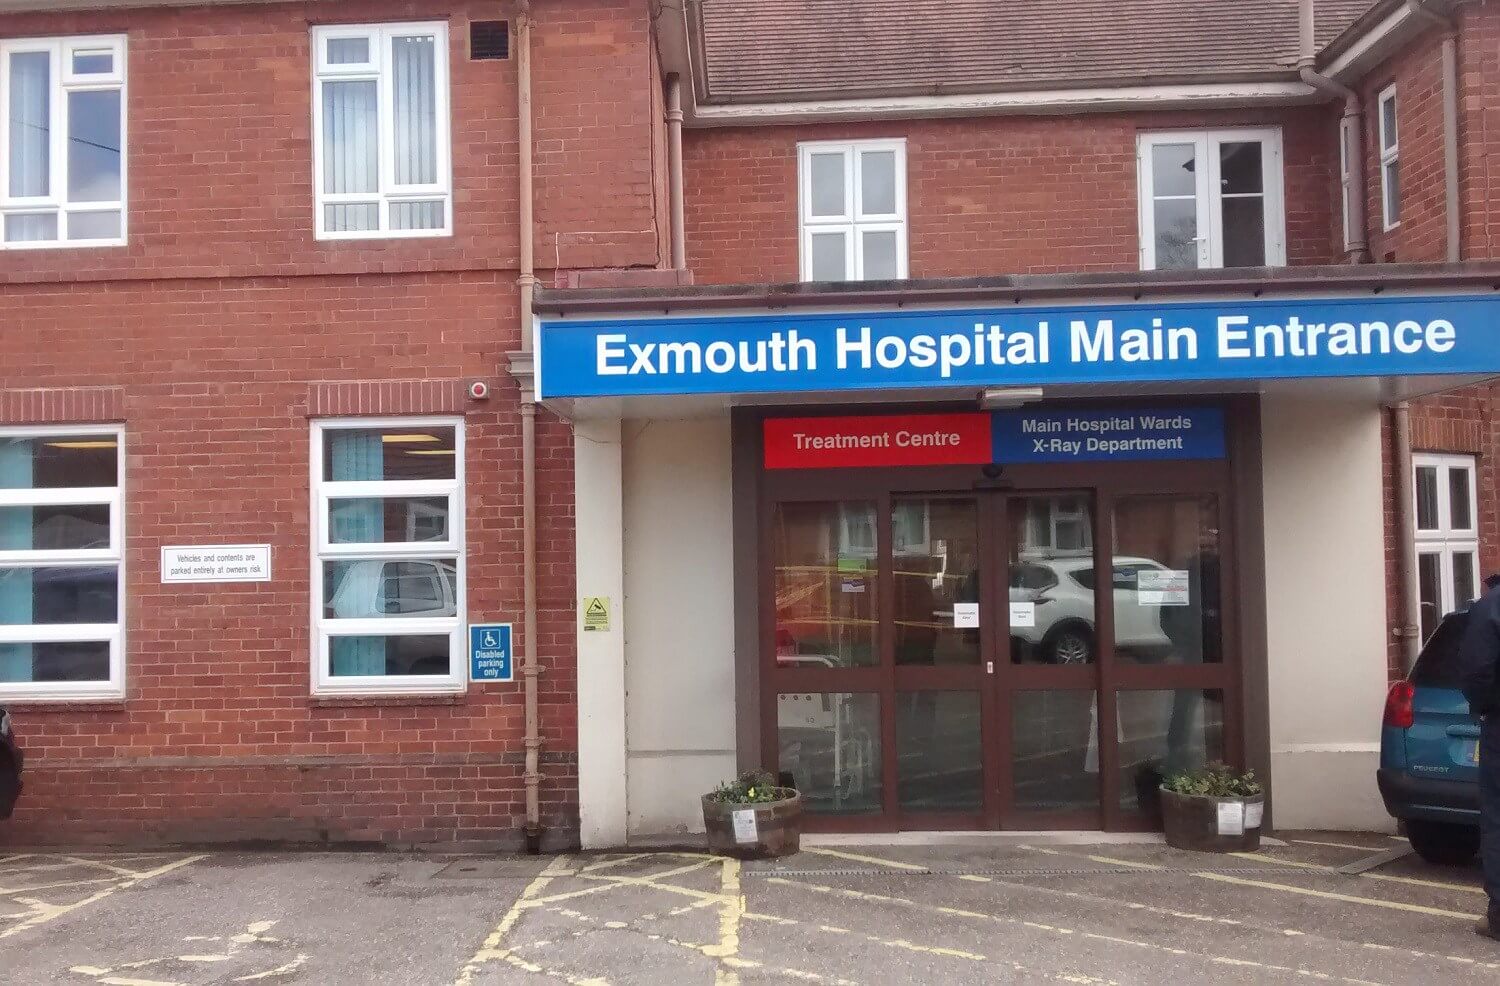 The main entrance of Exmouth Hospital